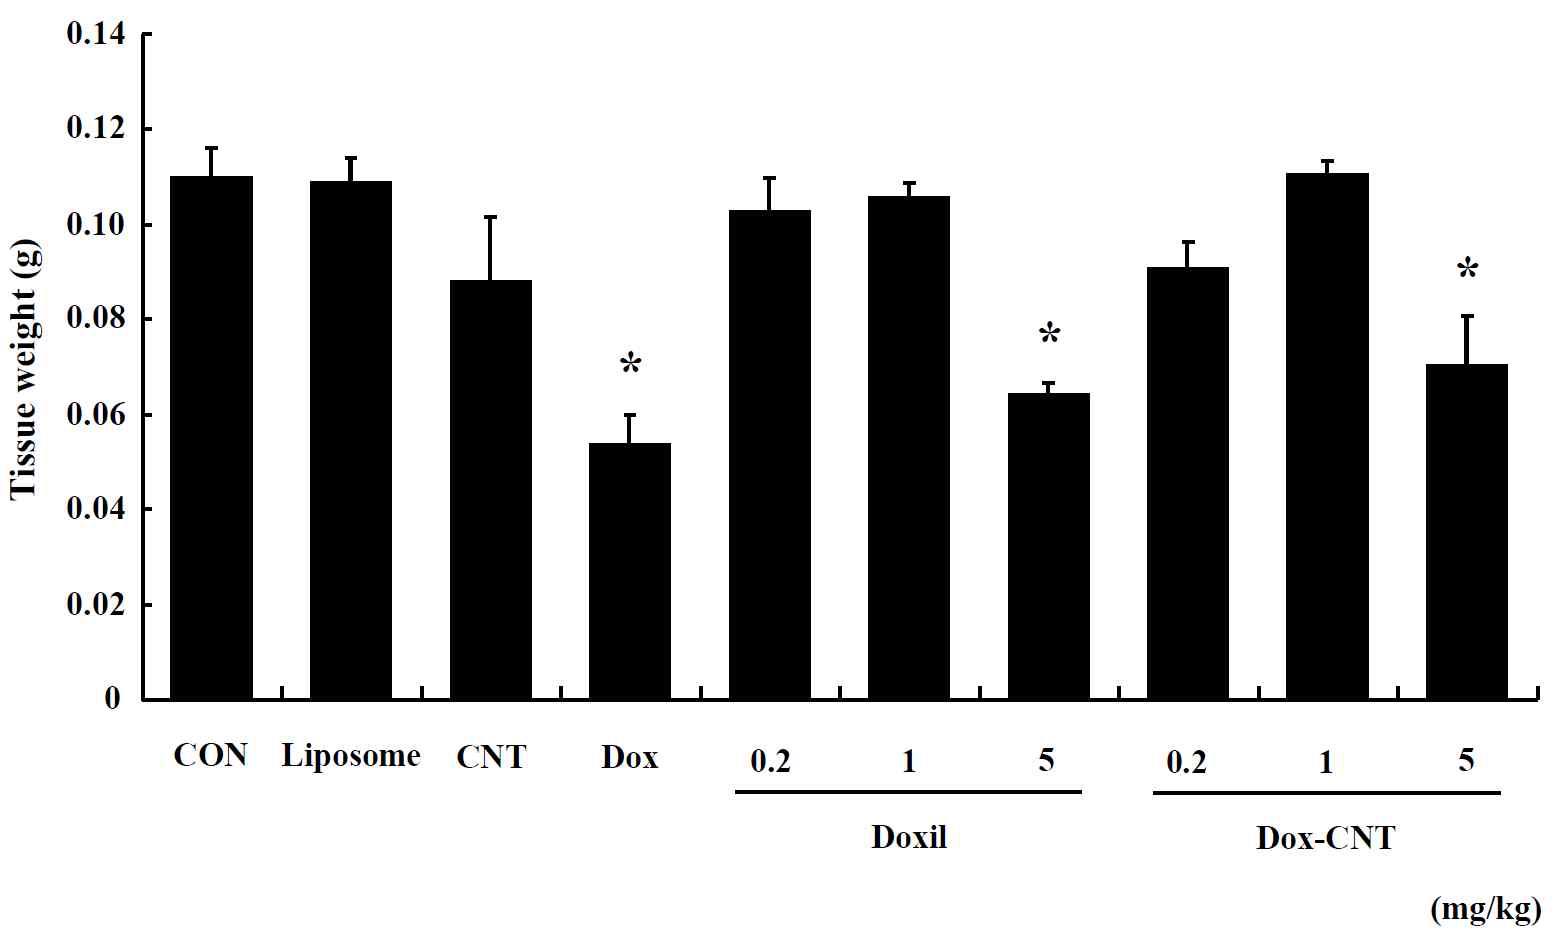 The change of spleen weight in male ICR mice of repeated exposure for 14 days. Mice were respectively administered by intravenous injection with liposome, CNT, Dox, Doxil (0.2, 1, 5 mg/kg) and Dox-CNT (0.2, 1, 5 mg/kg). The results are presented as mean ± SE (n = 10). * p < 0.05, significantly different from the control.